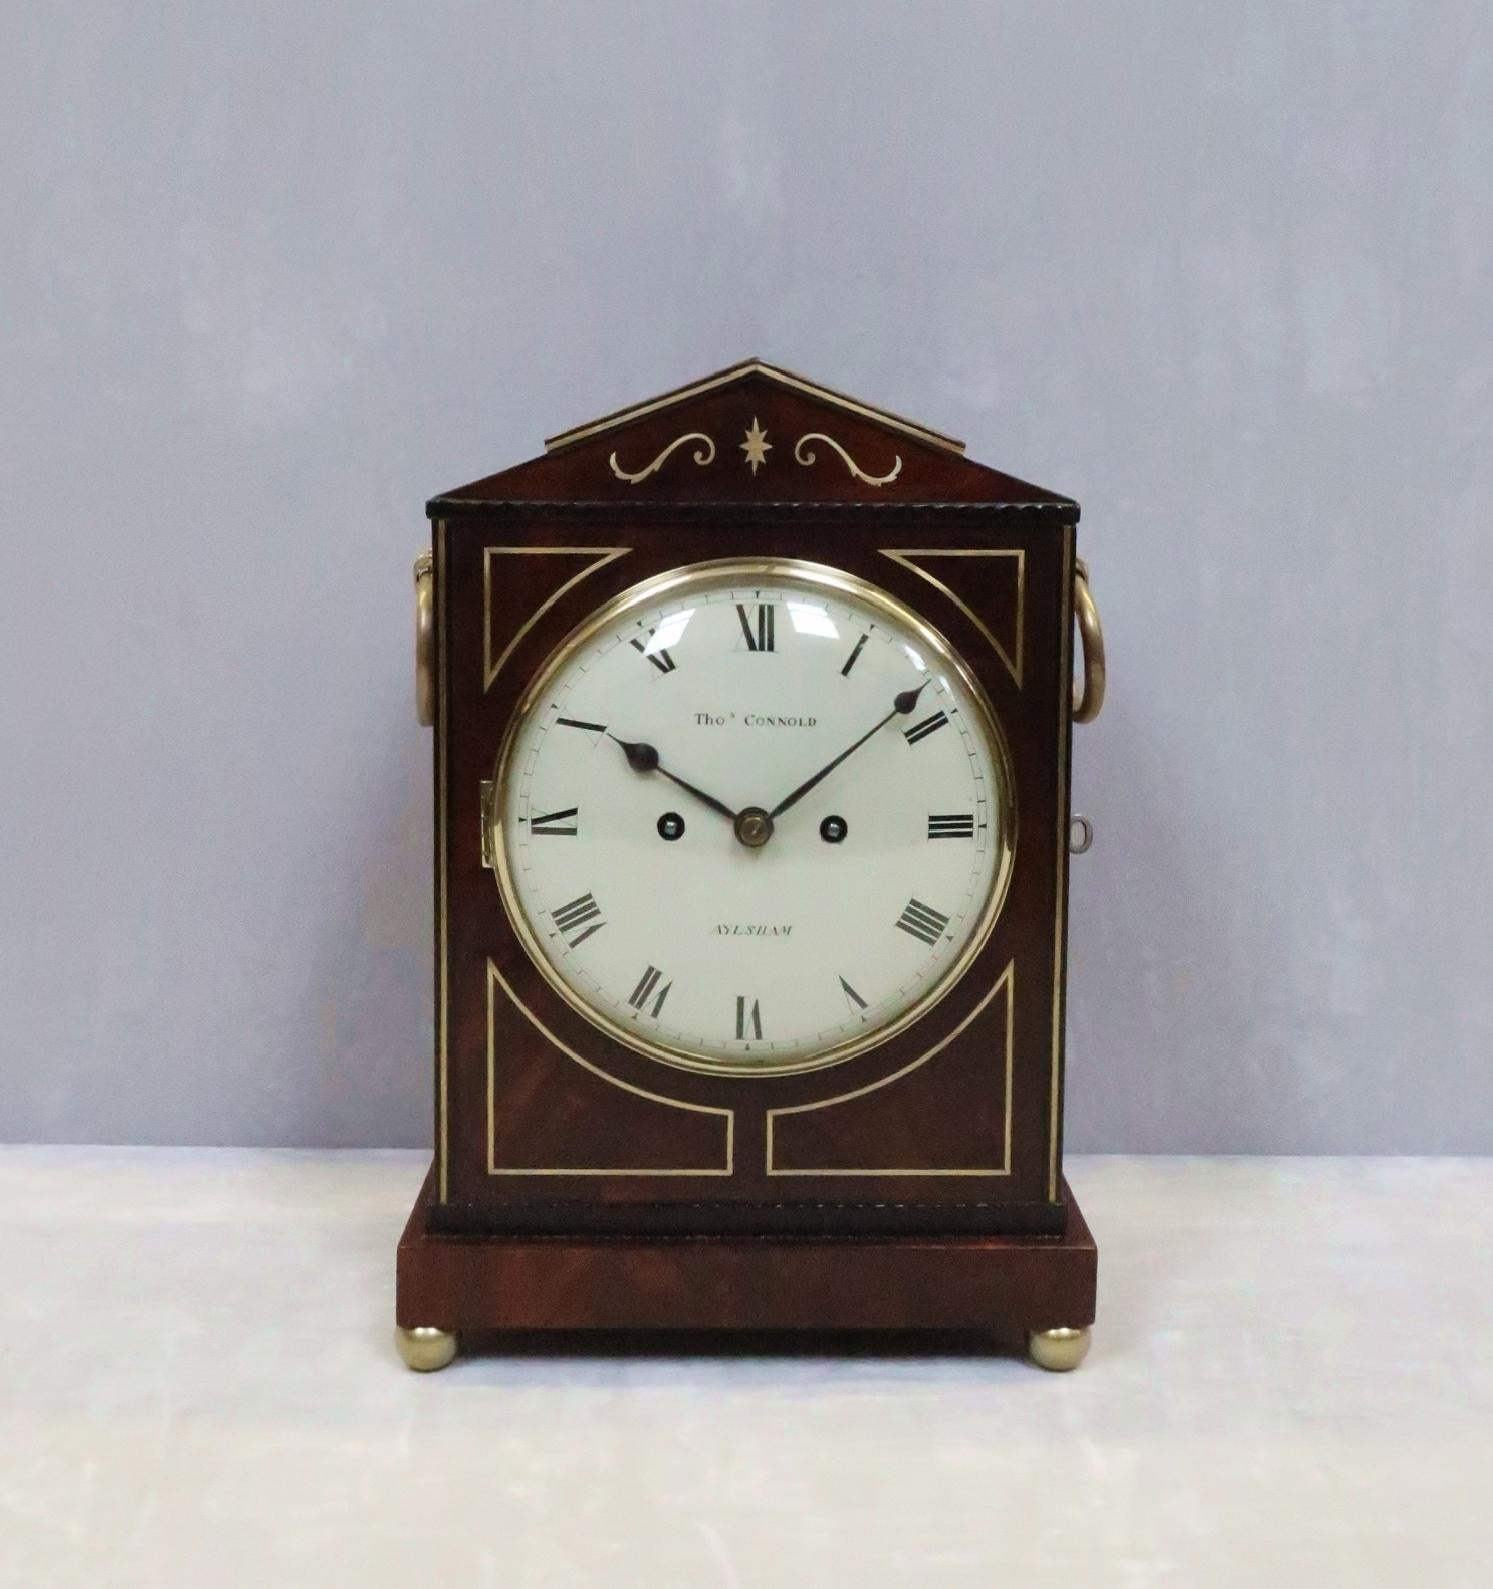 An extremely good quality English figured mahogany bracket or table clock with architectural shaped top and brass string inlay detail to the front, fish scale sound frets to the side and decorative ringed carrying handles stood on brass ball feet.